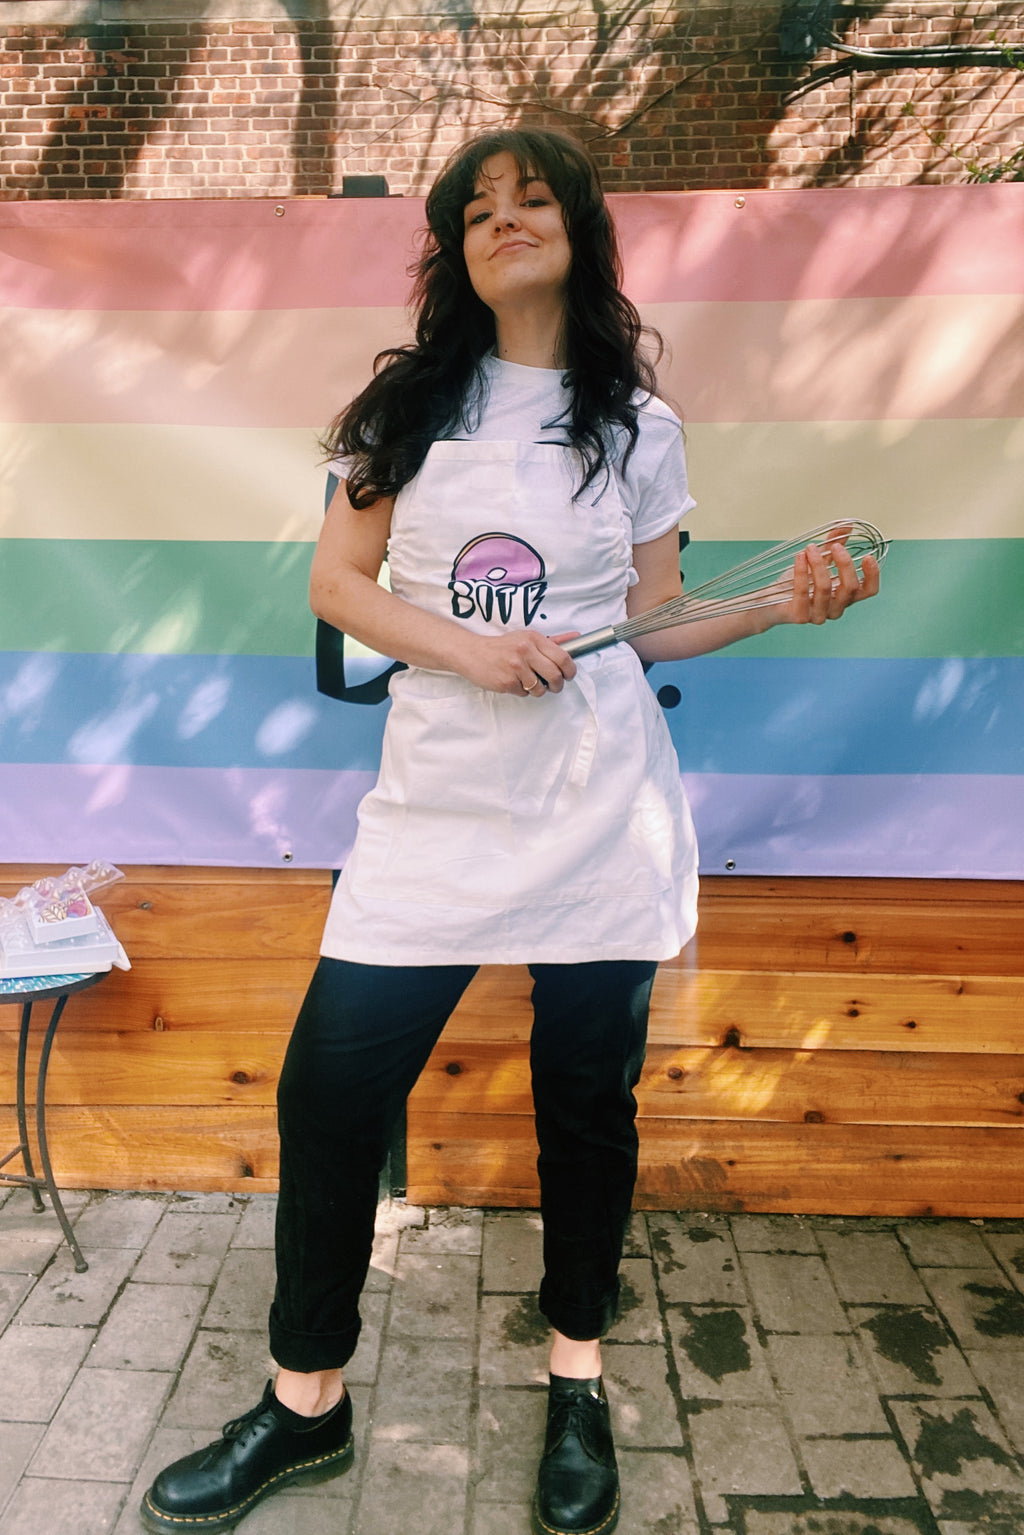 queer owned mini donut bakery in brooklyn nyc selling baked, artisan, custom, mini donuts and merchandise like aprons, hats, and t-shirts. custom dessert catering nyc